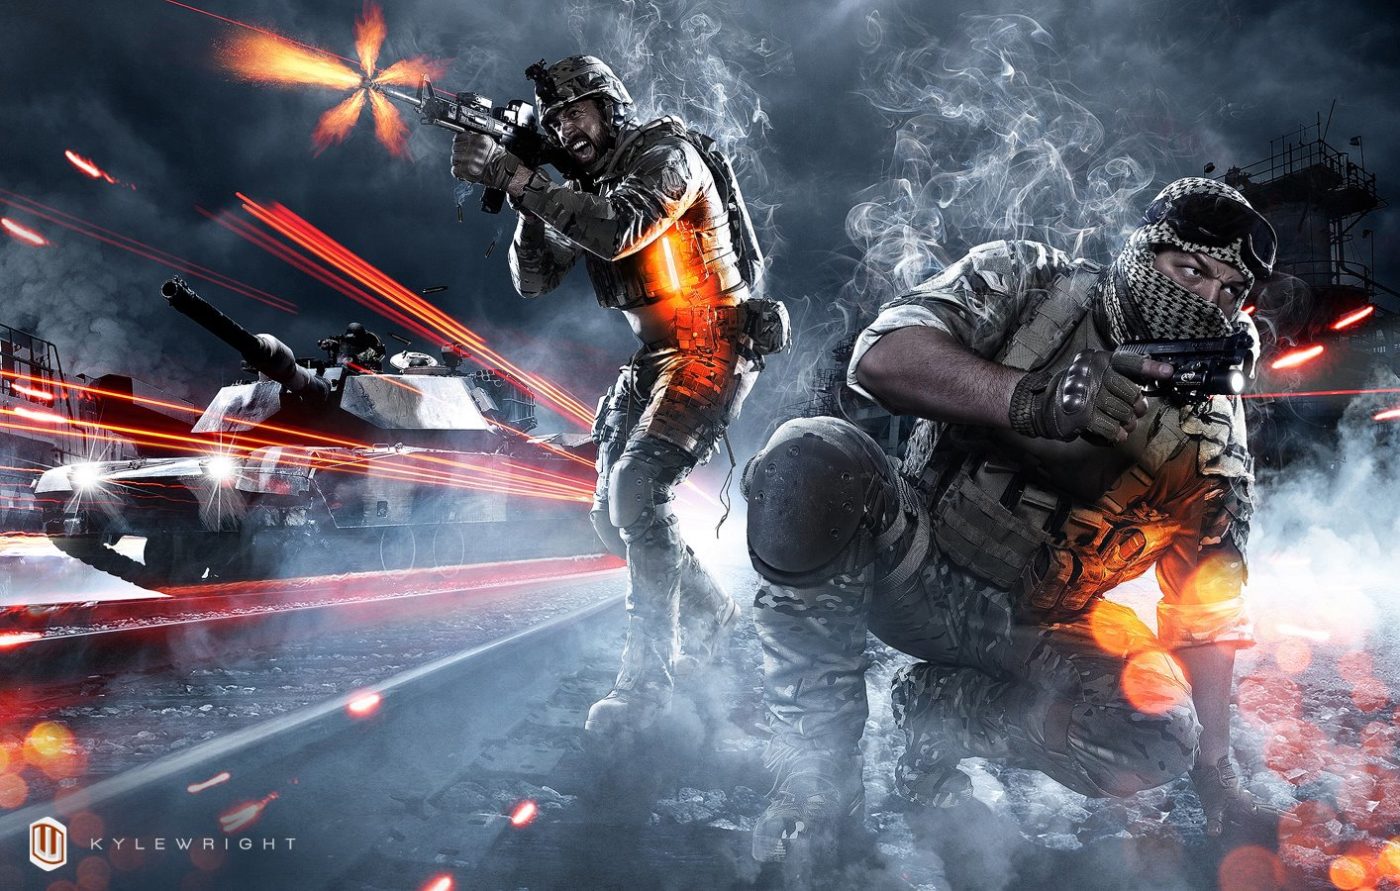 Be Advised, Jaw Dropping Battlefield 3 Artwork Spotted ...